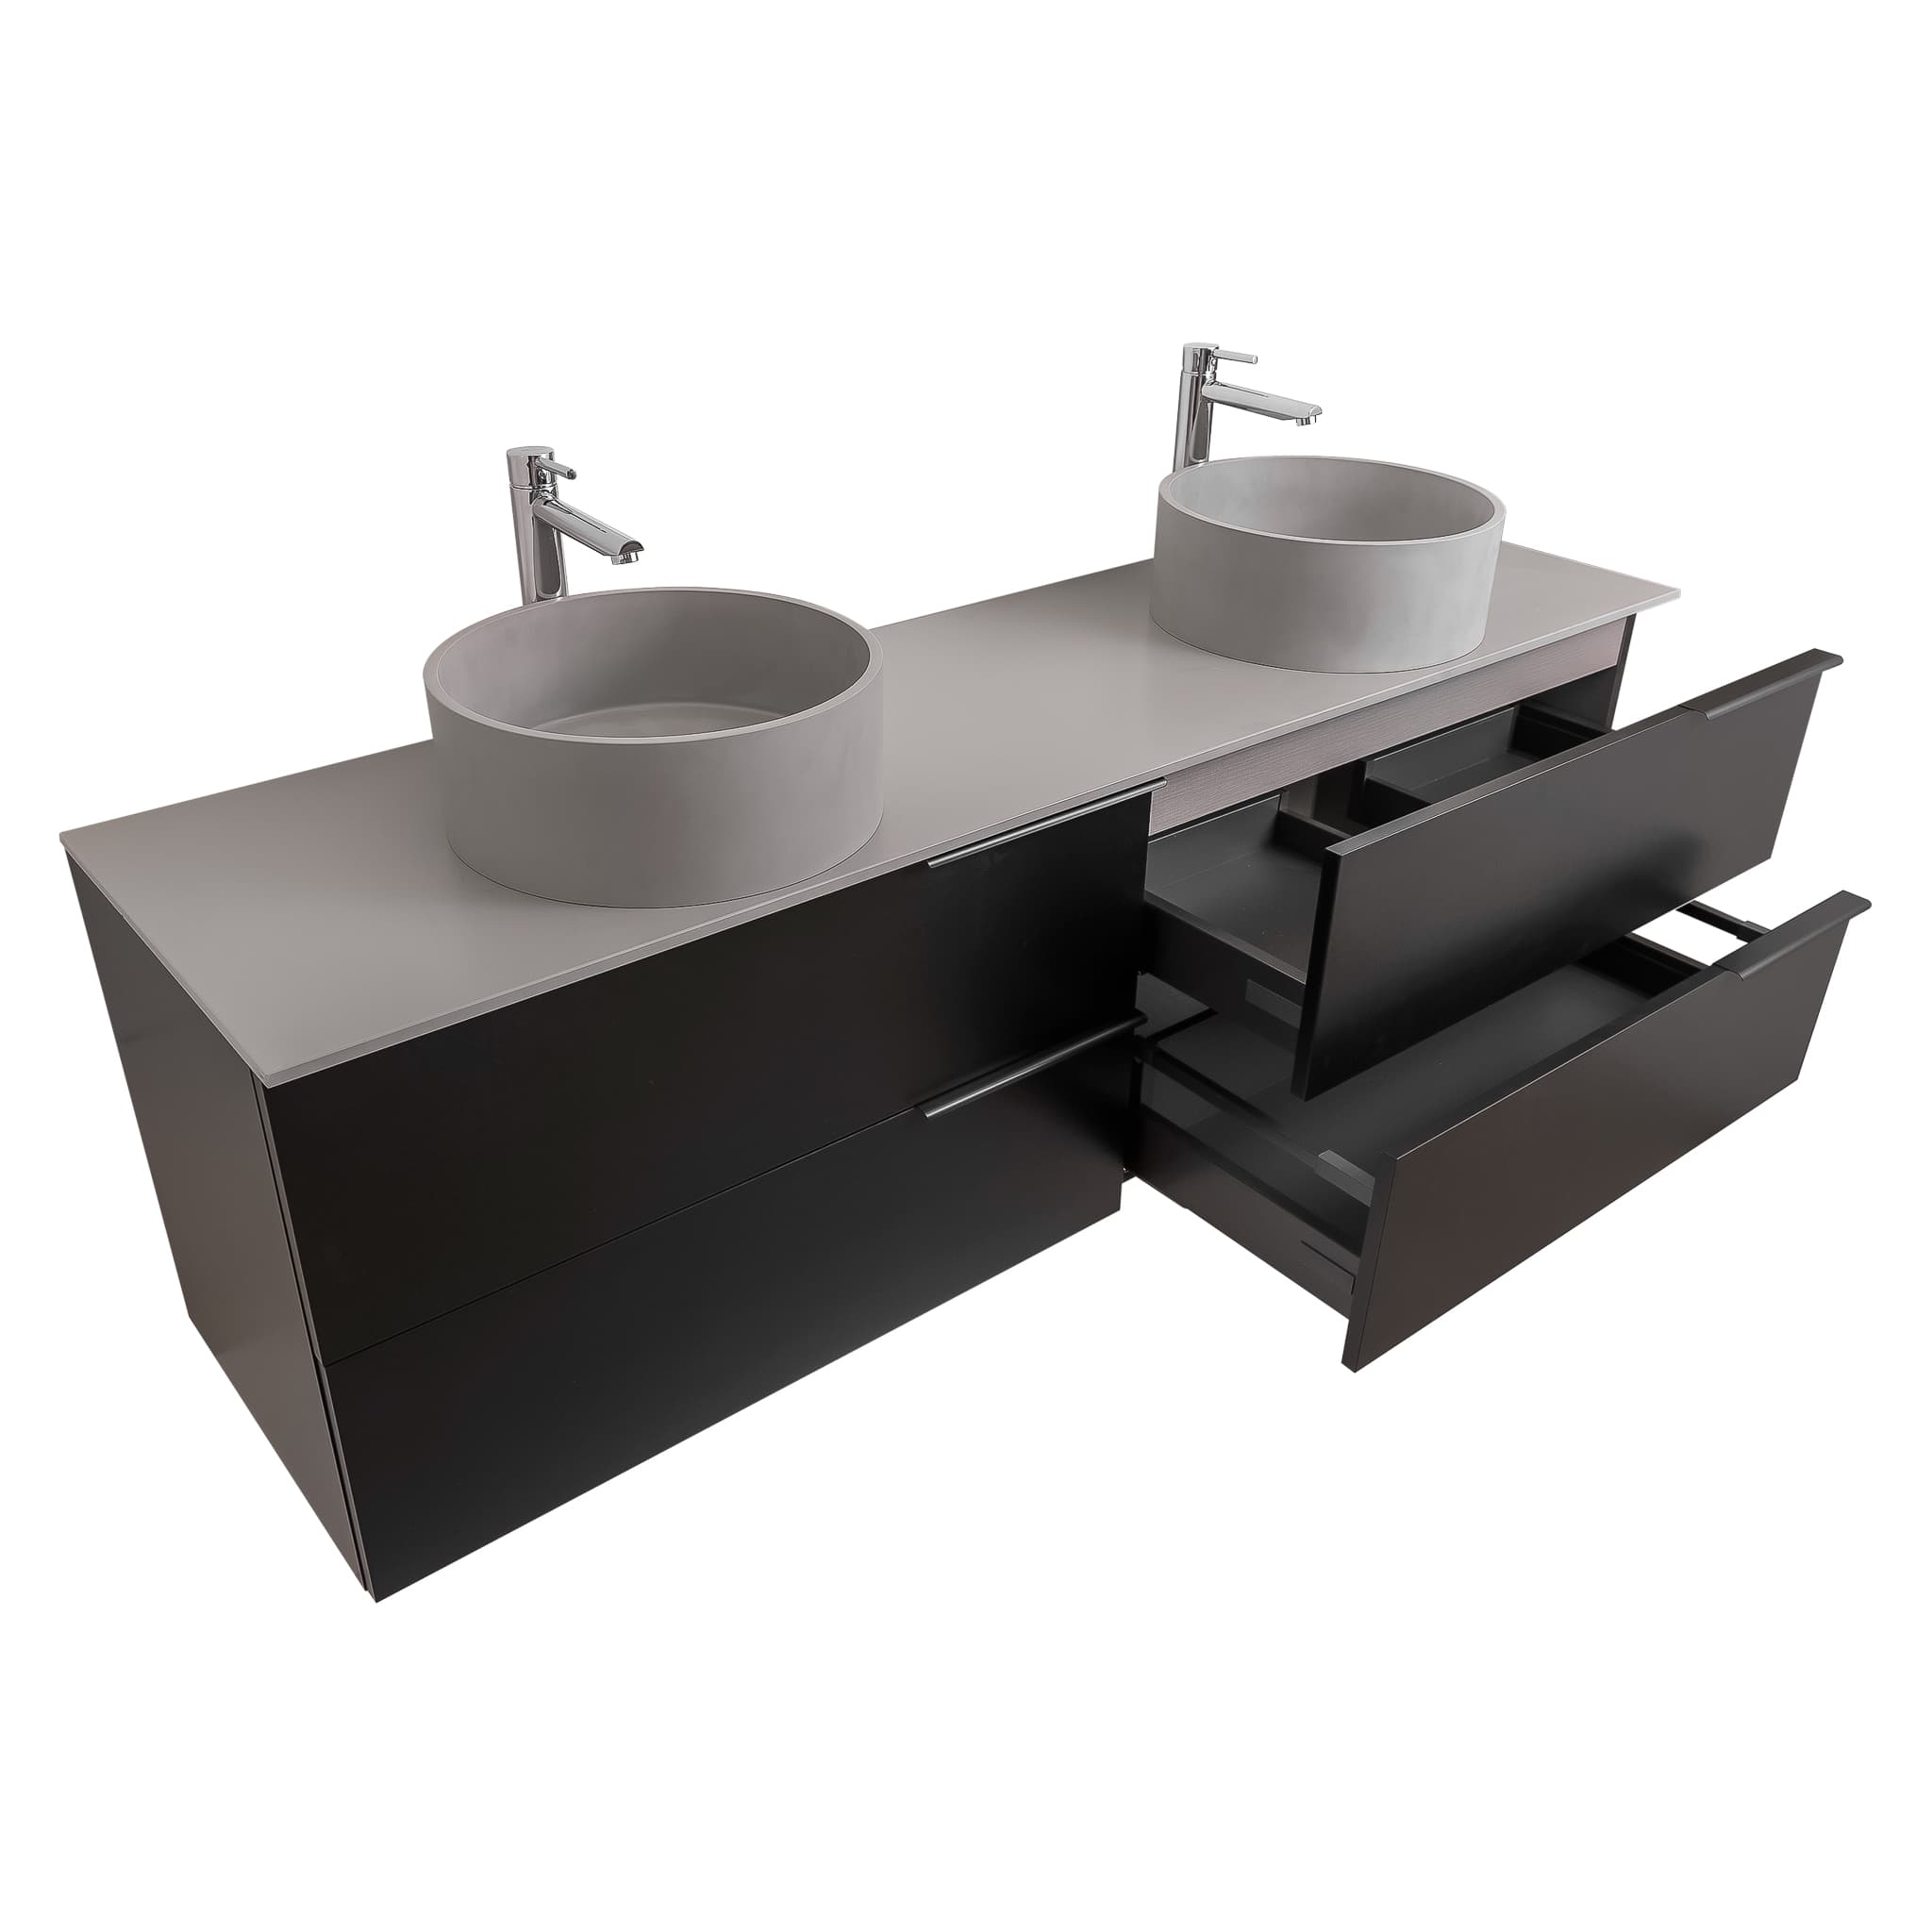 Mallorca 63 Matte Black Cabinet, Solid Surface Flat Grey Counter And Two Round Solid Surface Grey Basin 1386, Wall Mounted Modern Vanity Set